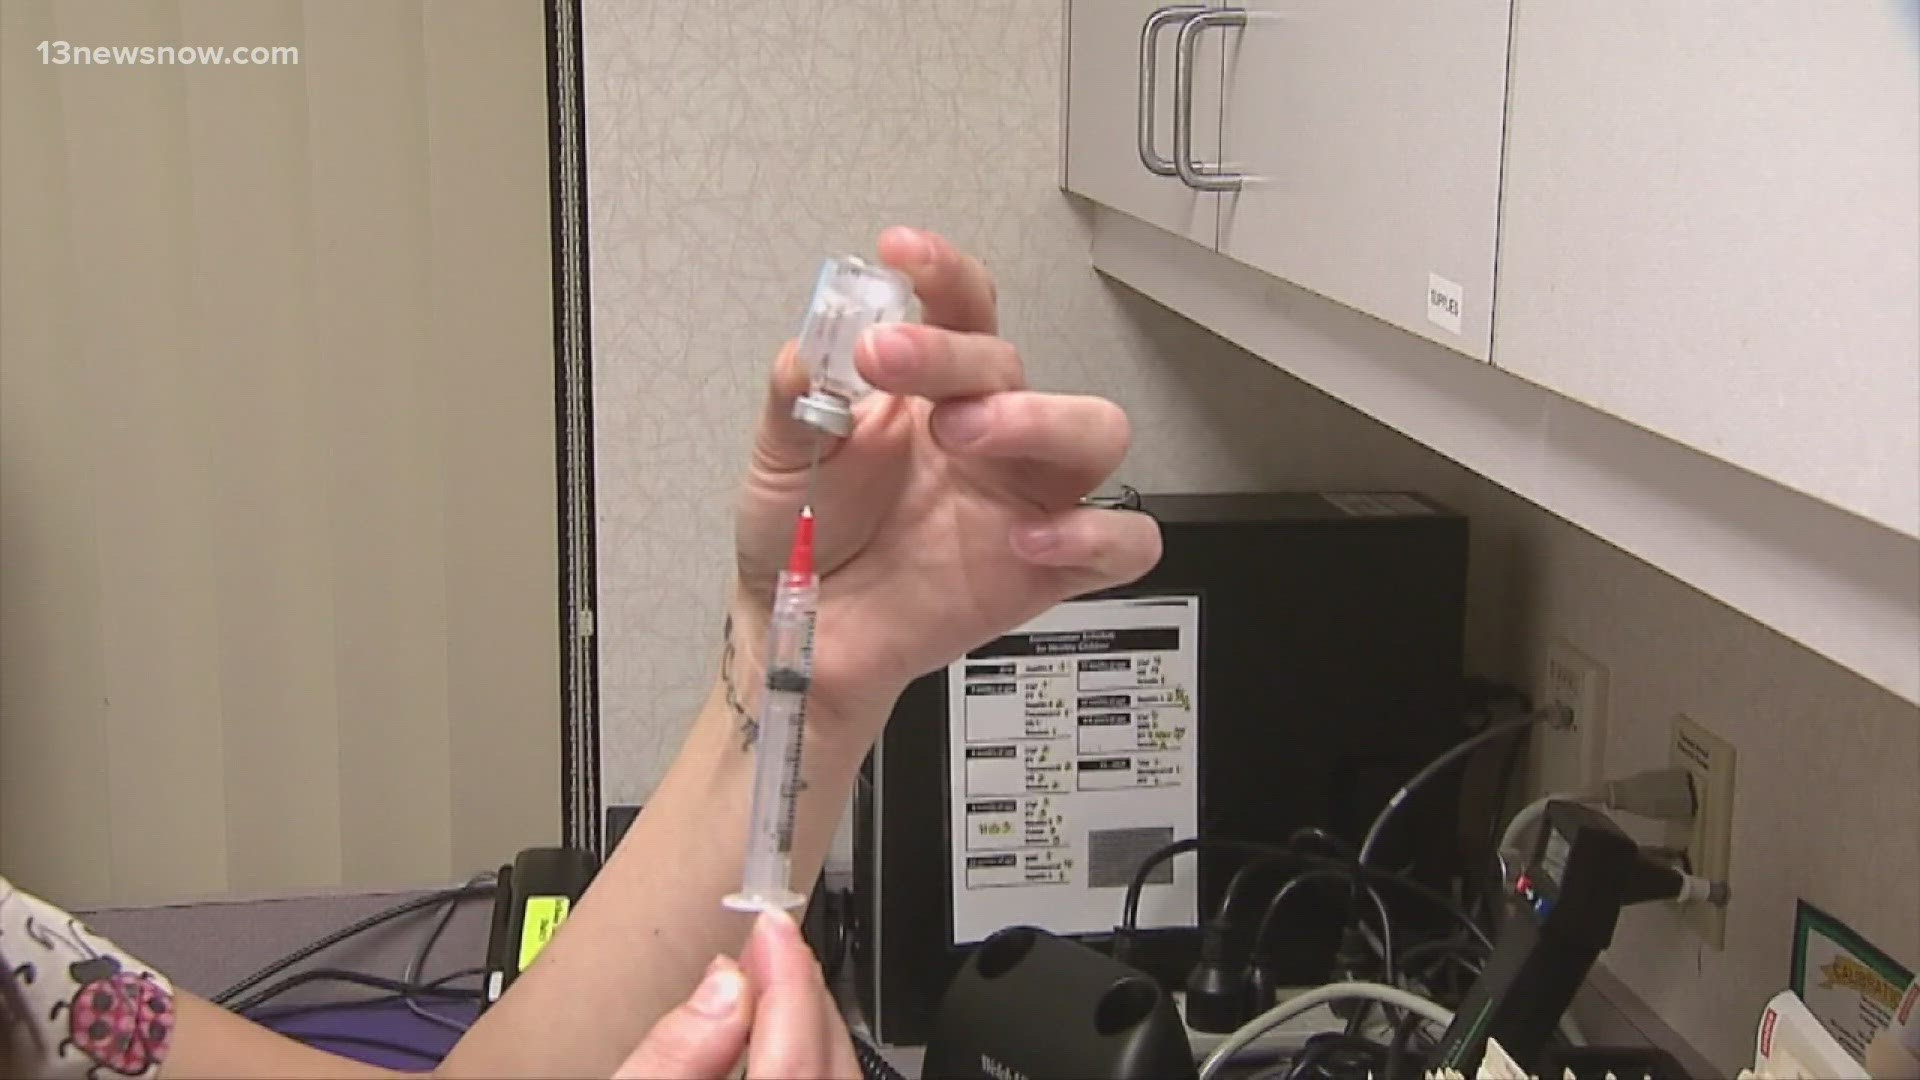 A survey presented to the CDC shows vaccination rates for the latest COVID-19 booster are in the single digits. Health experts are urging people to get the shot.